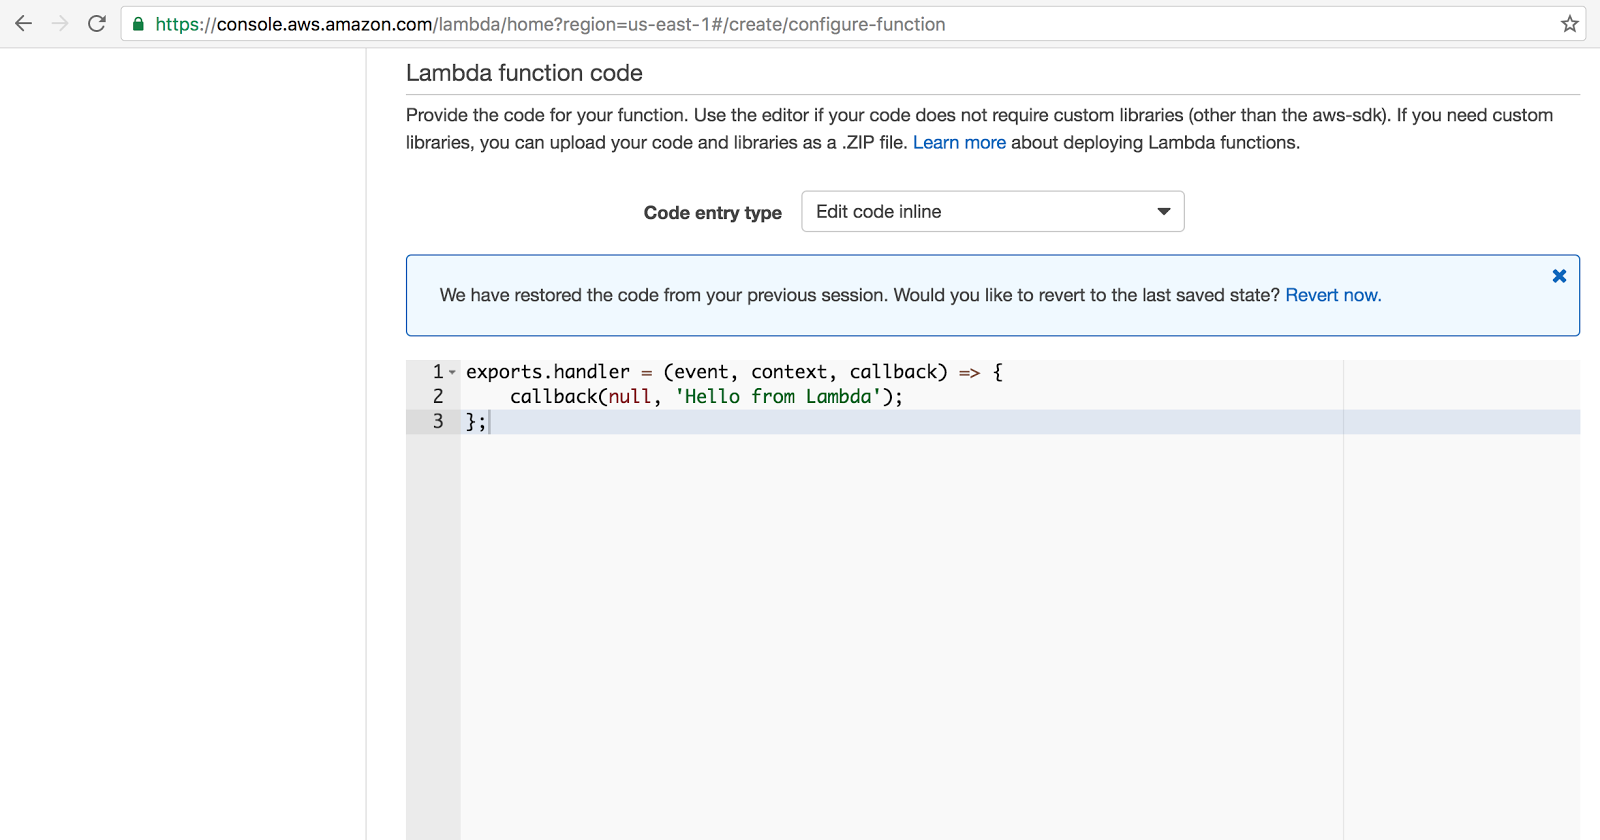 Screenshot of the online function editor